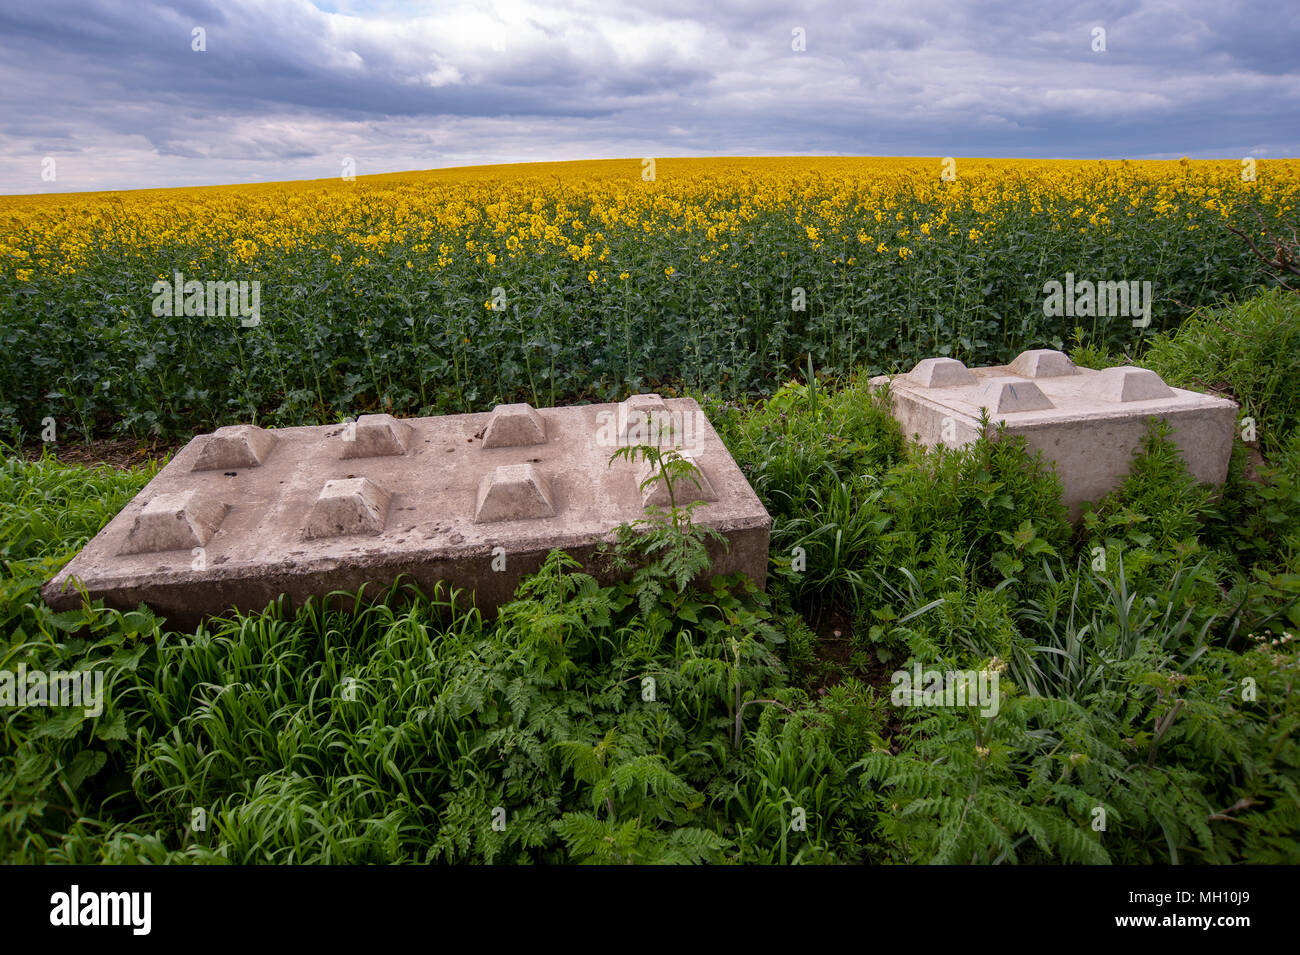 Block on the landscape, large concrete blocks looking like giant lego bricks, used by farmers to prevent unauthorised access to farmland by poachers a Stock Photo